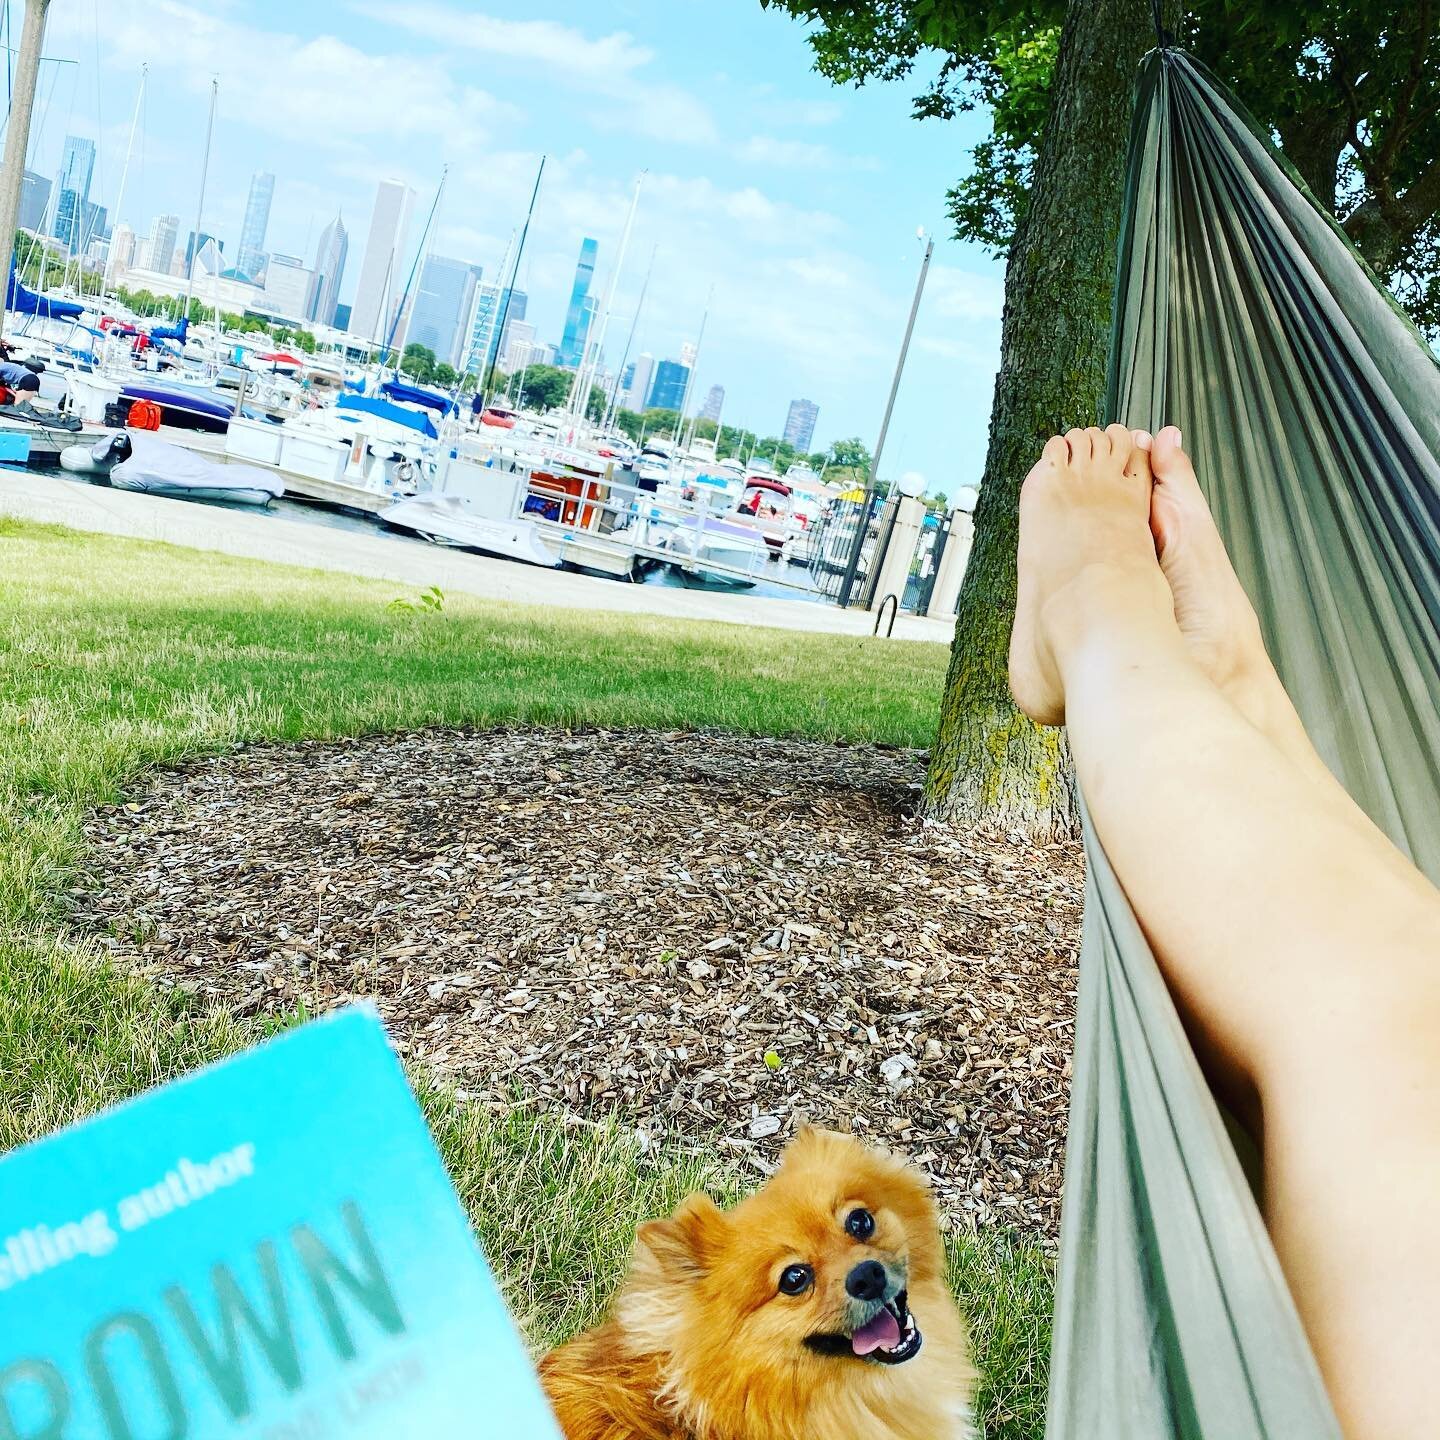 Hammocks in Harbors 📗🌊✨🌱

&ldquo;You will always belong anywhere you show up as yourself and talk about yourself and your work in a real way.&rdquo; @brenebrown #bravingthewilderness